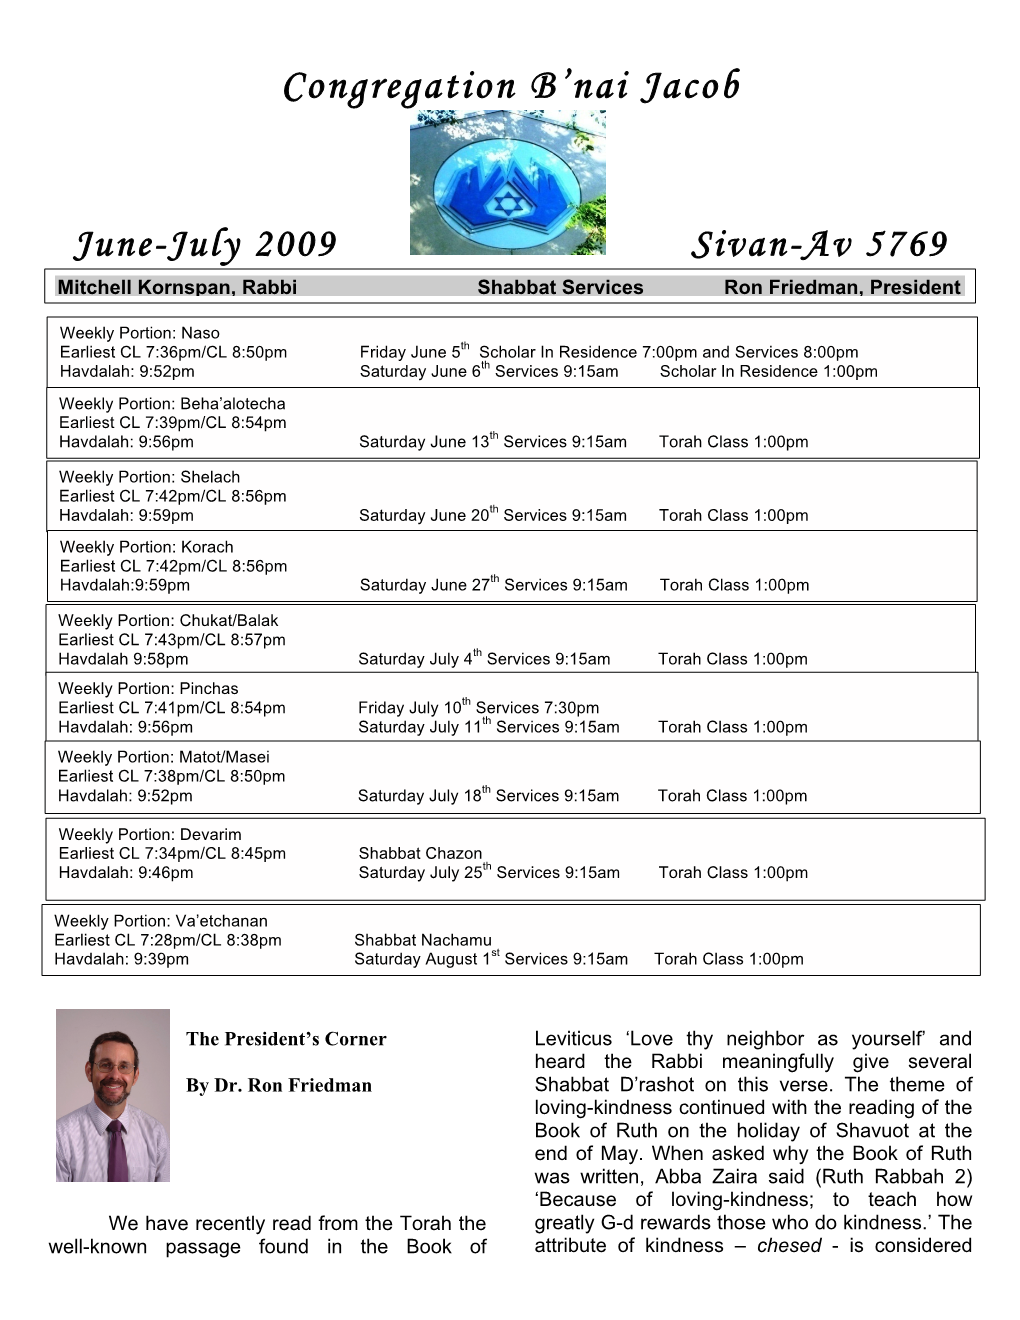 June and July Bulletin